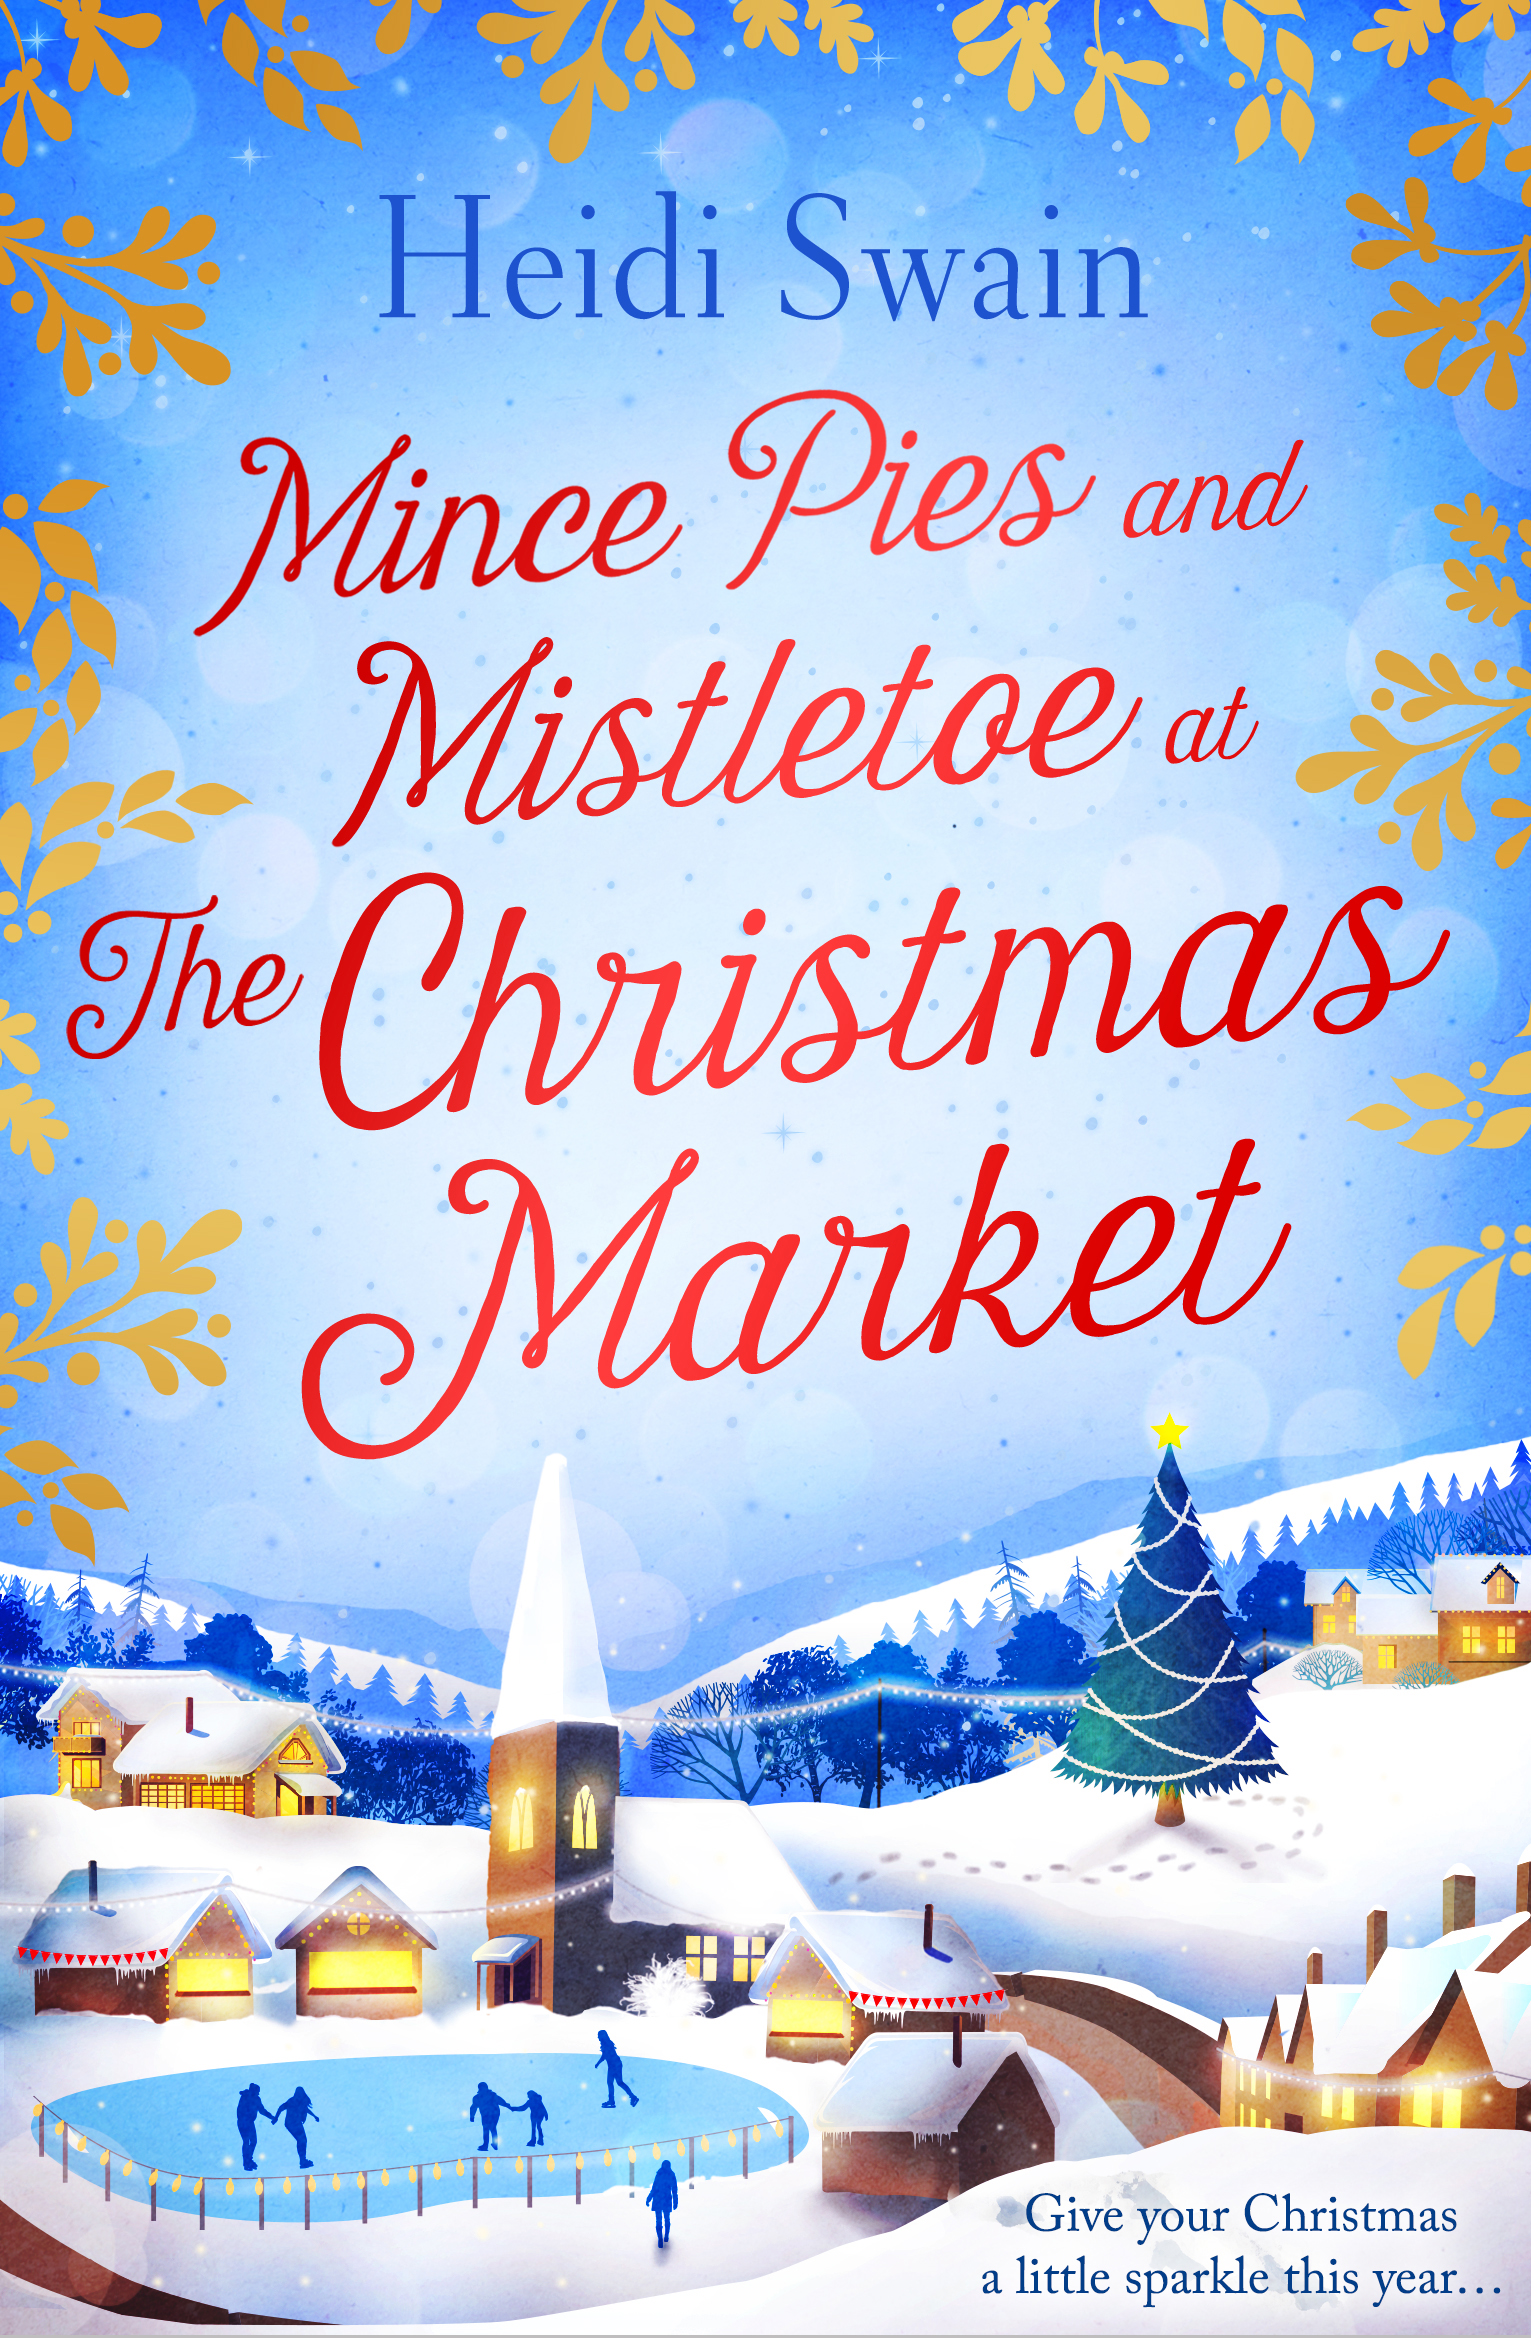 Mince Pies and Mistletoe at the Christmas Market final cover